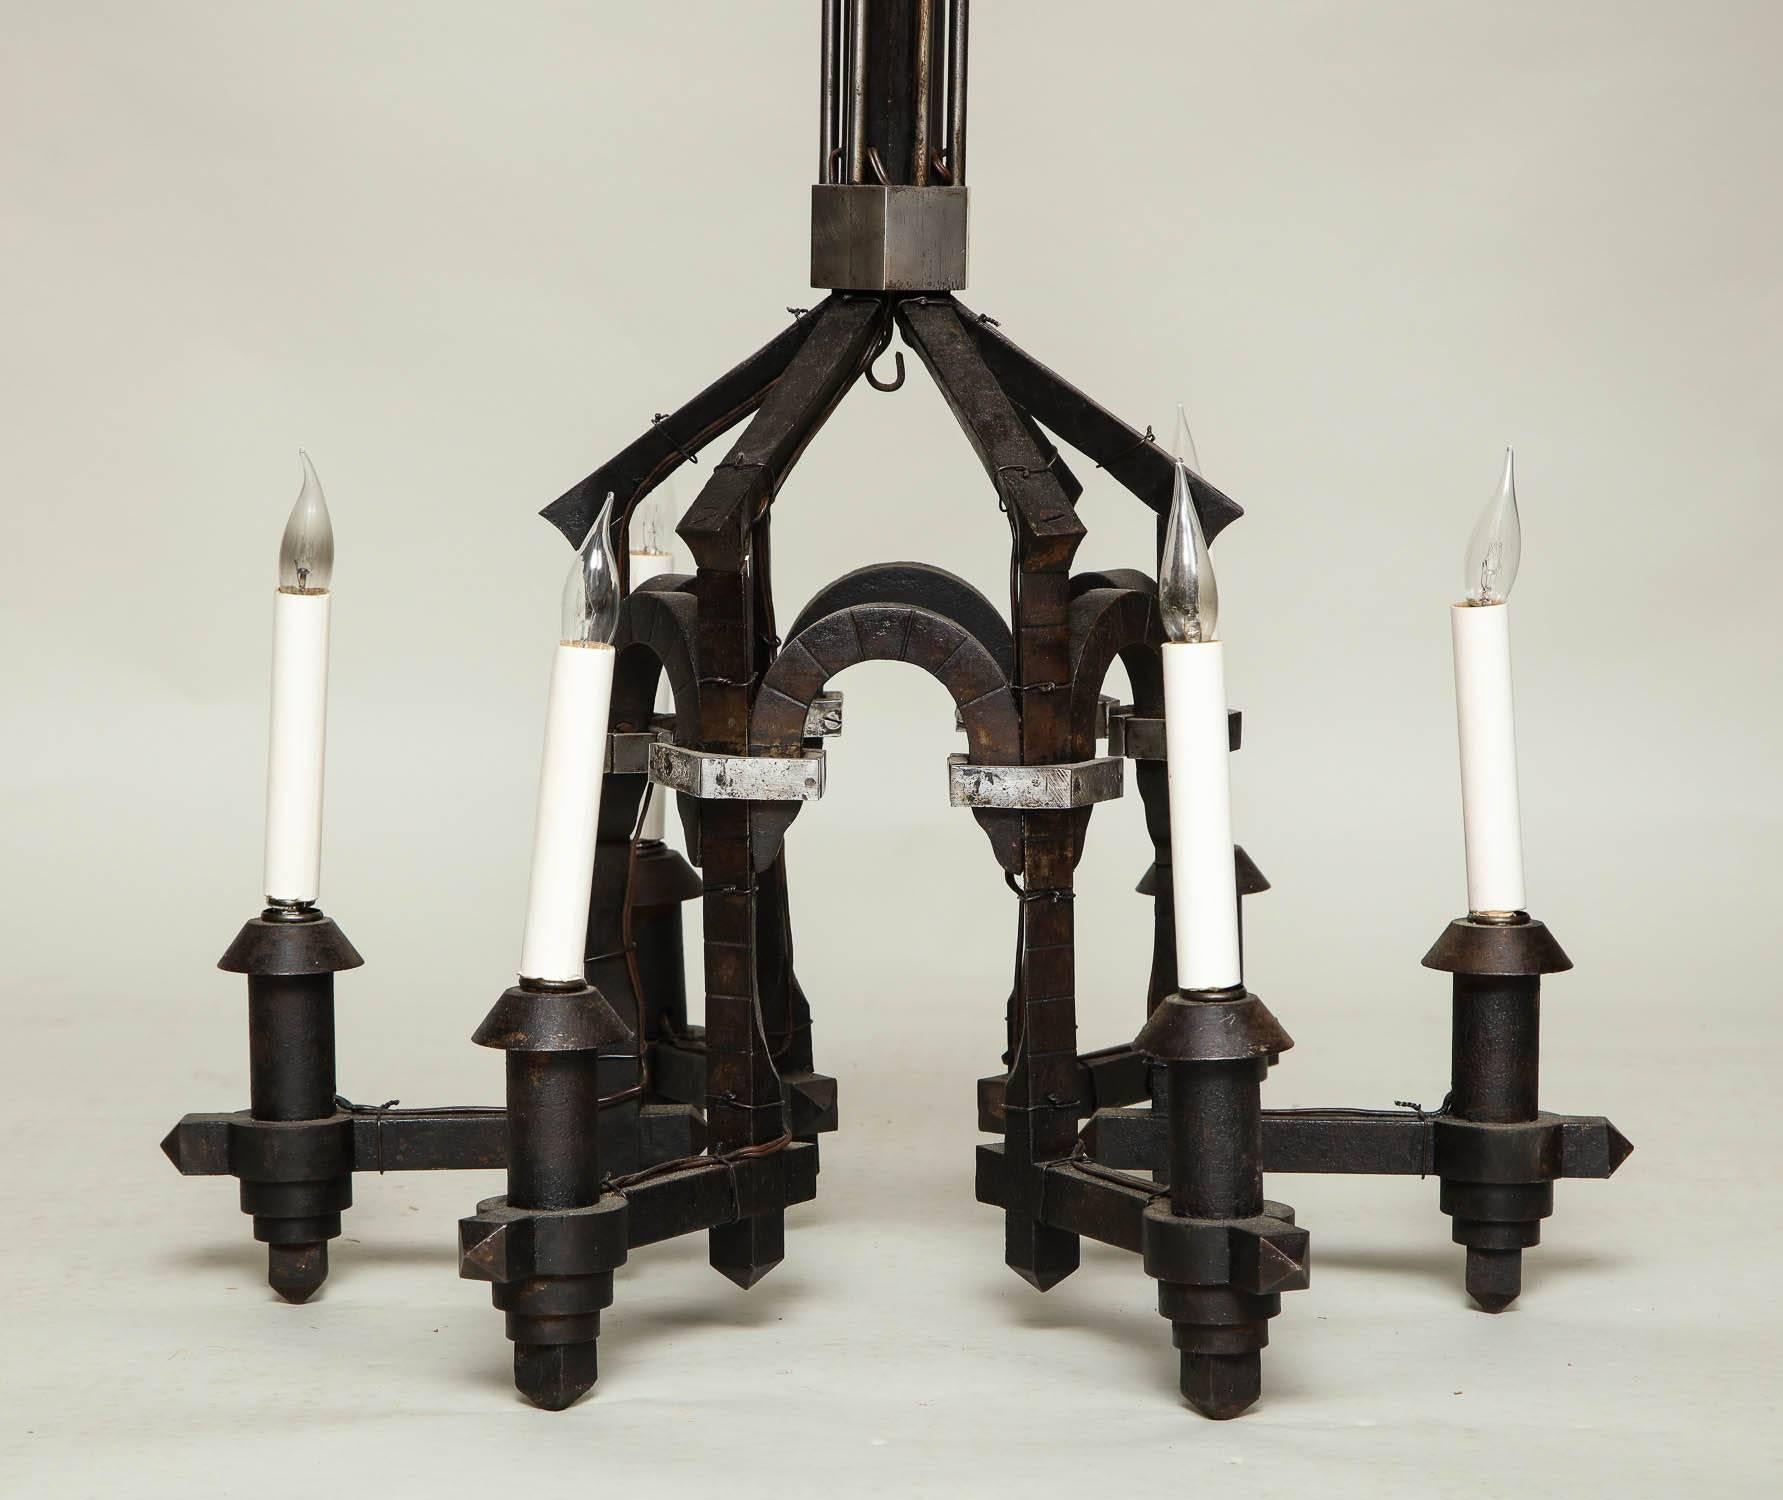 Forged architectural iron six-light chandelier in blackened wrought iron with bright polished details, beautifully crafted from mortised and peened iron with a slightly Neo-Gothic style.